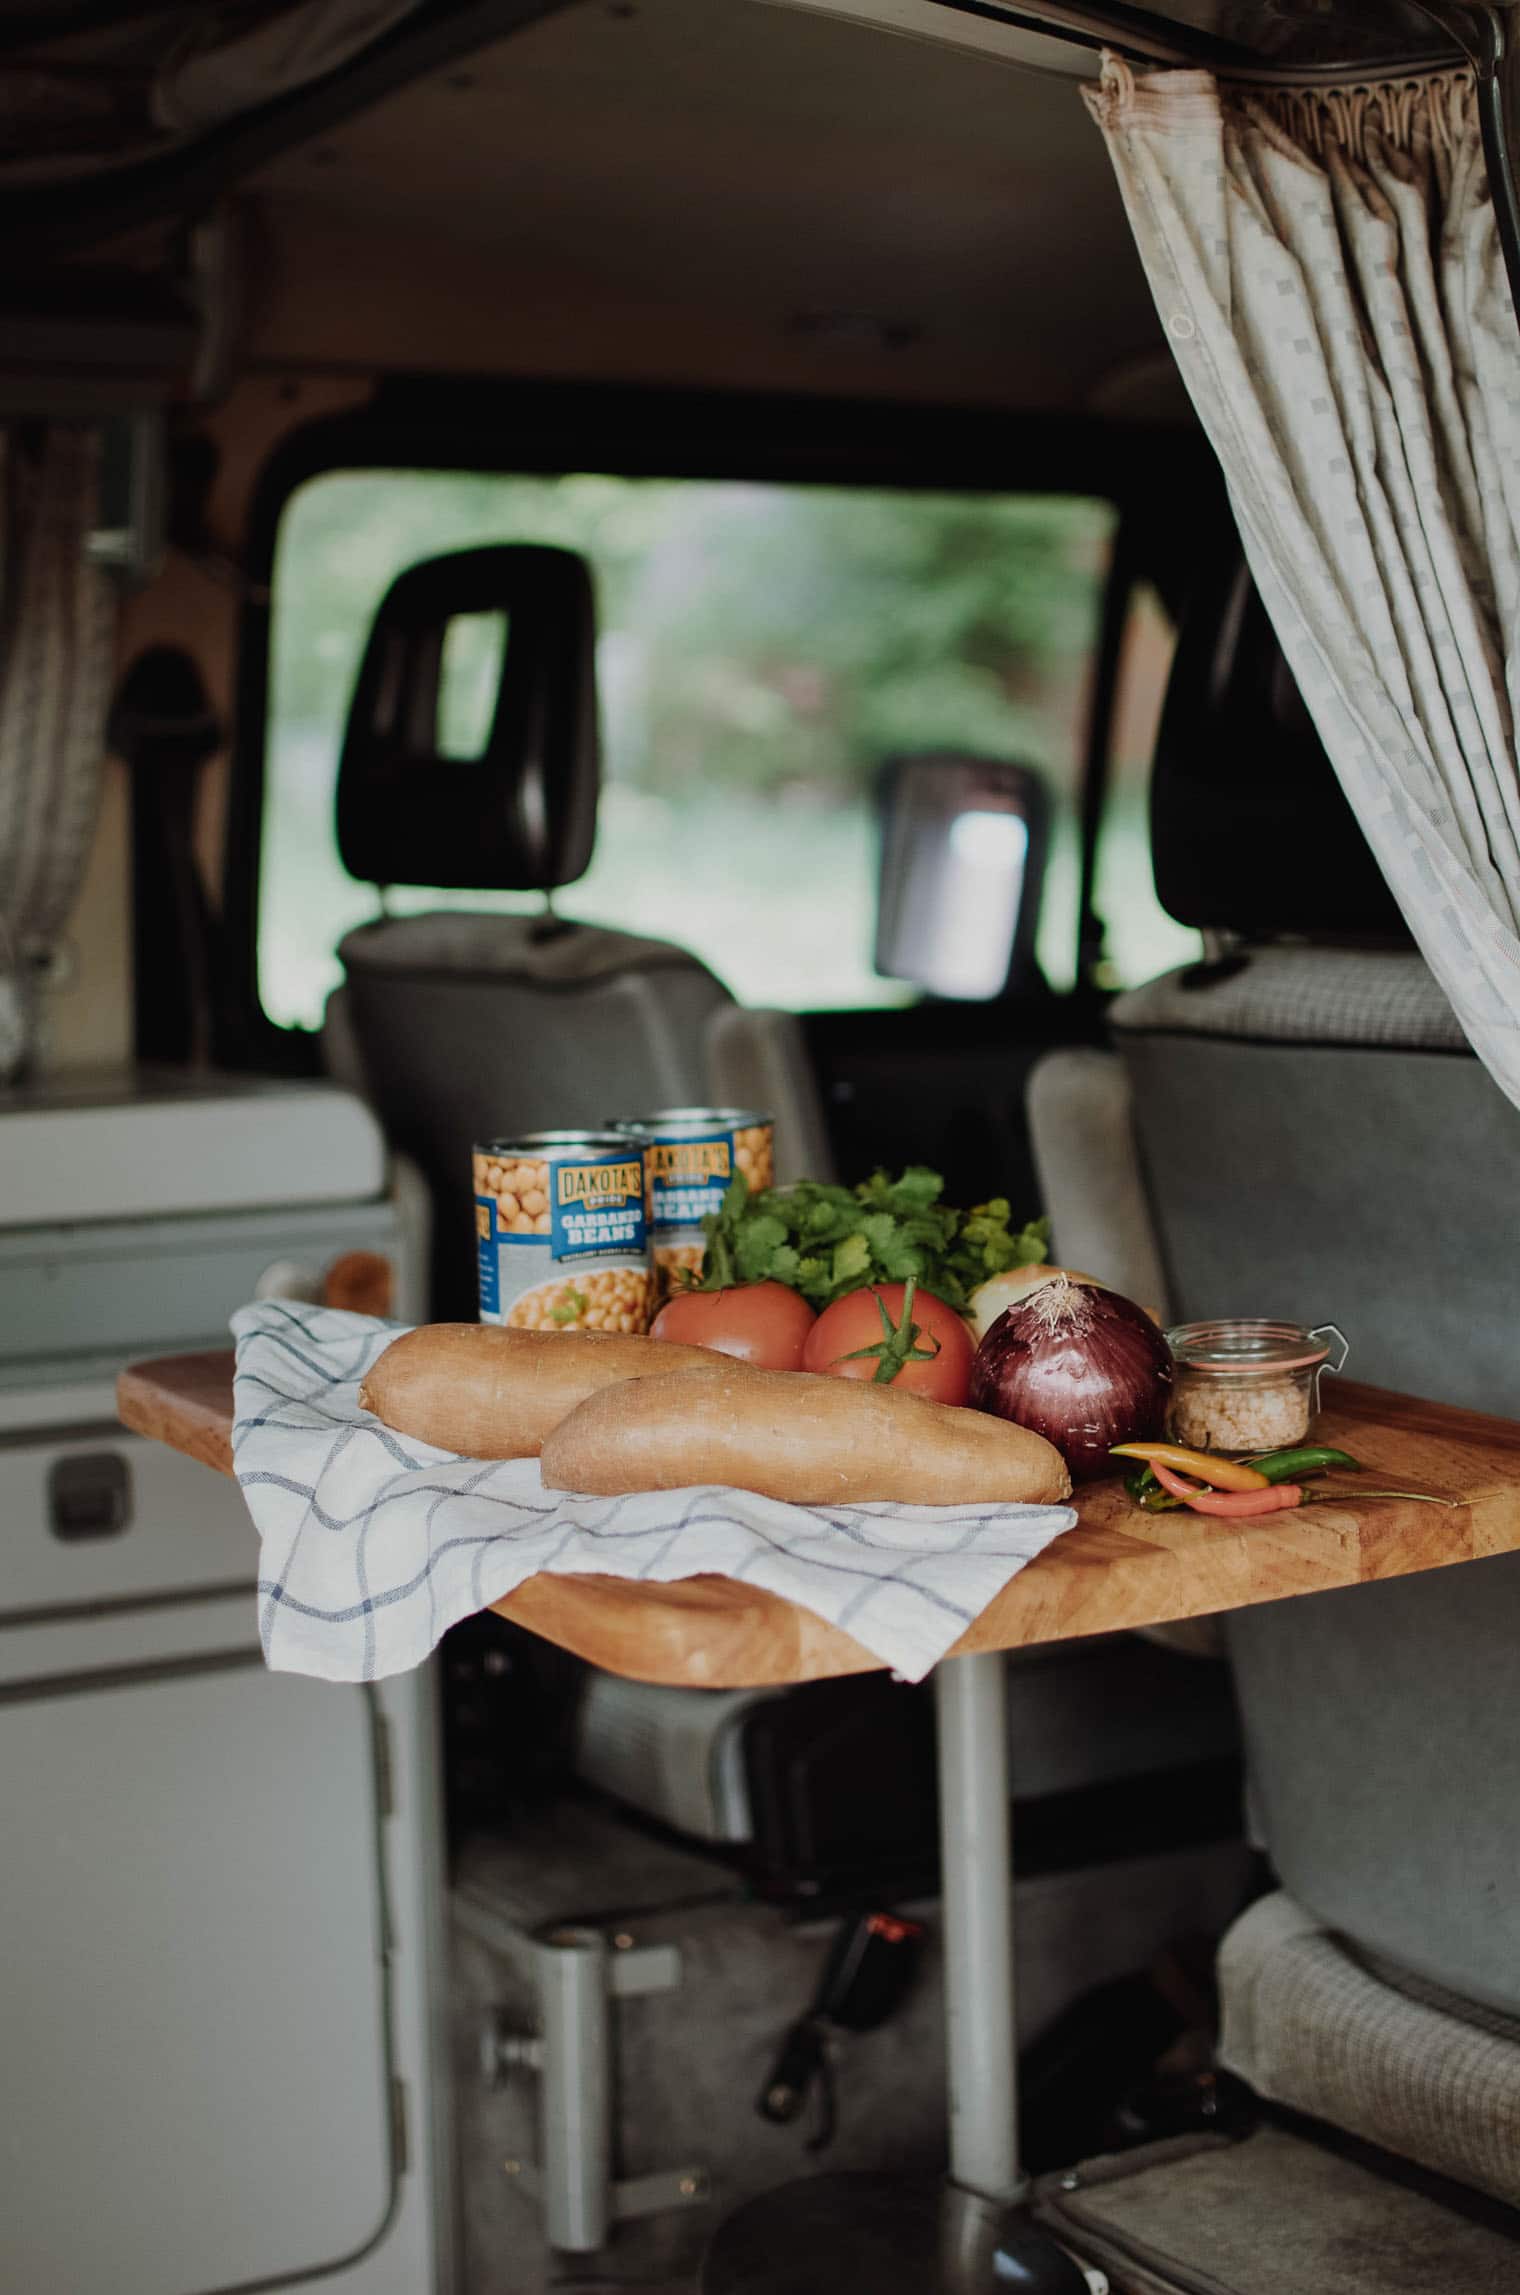 Ingredients for chana masala on a table in a campervan